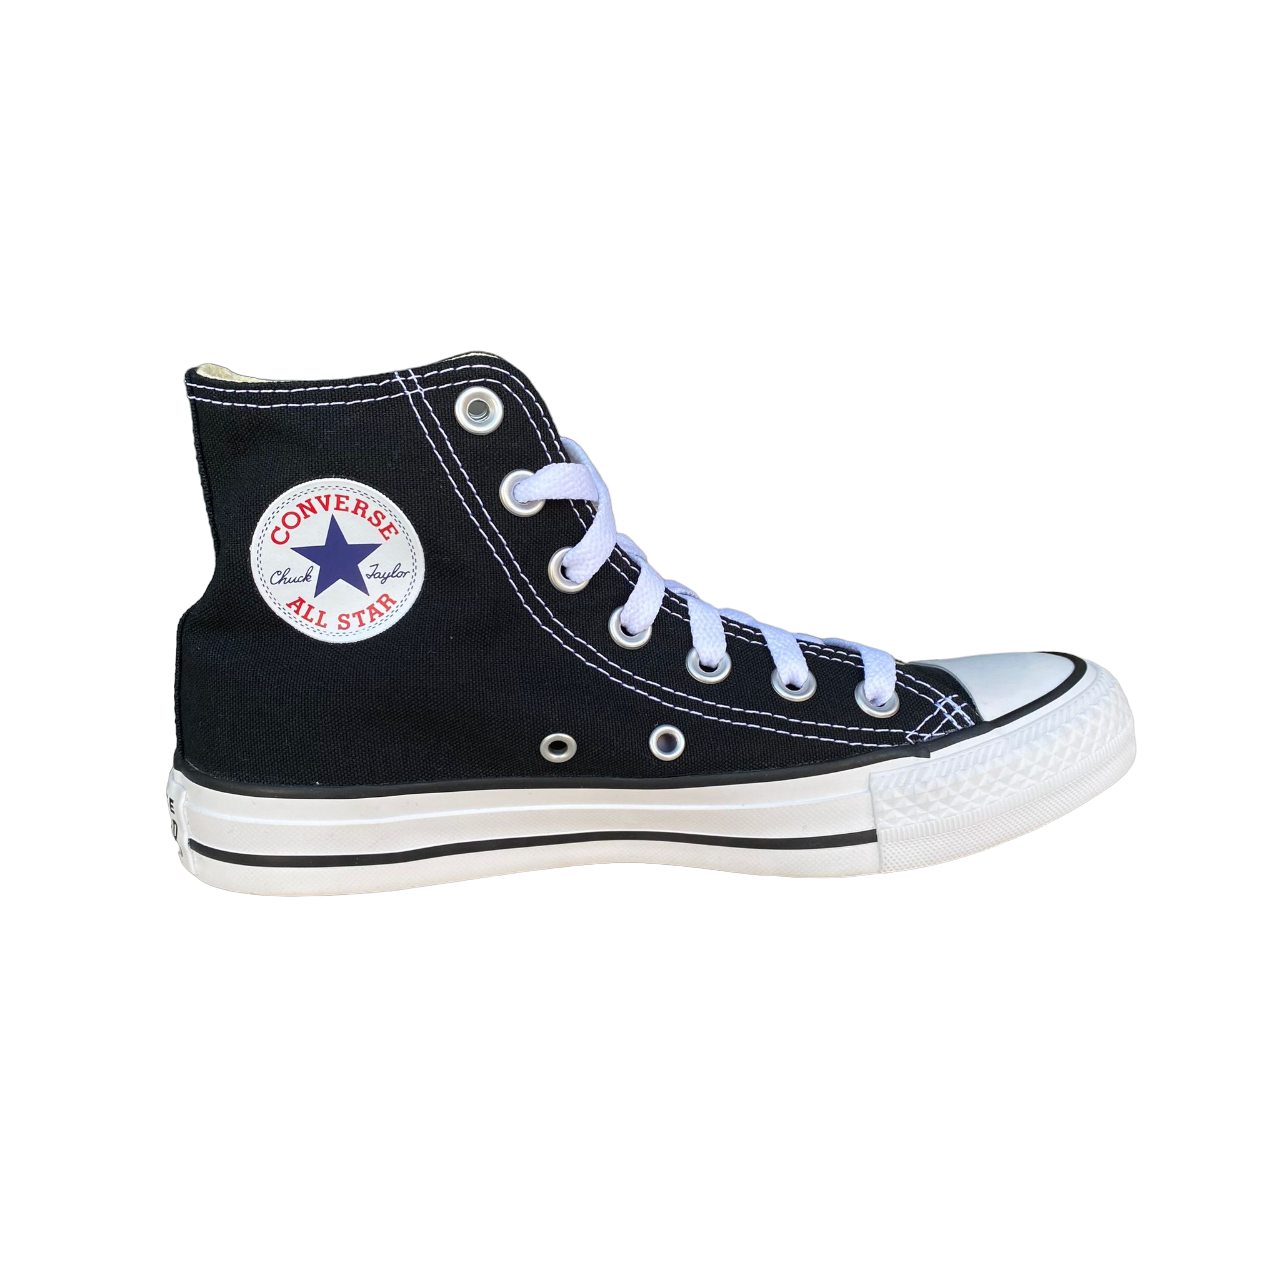 Converse All Star Chuck Taylor Classic M9160 black adult sneakers shoe